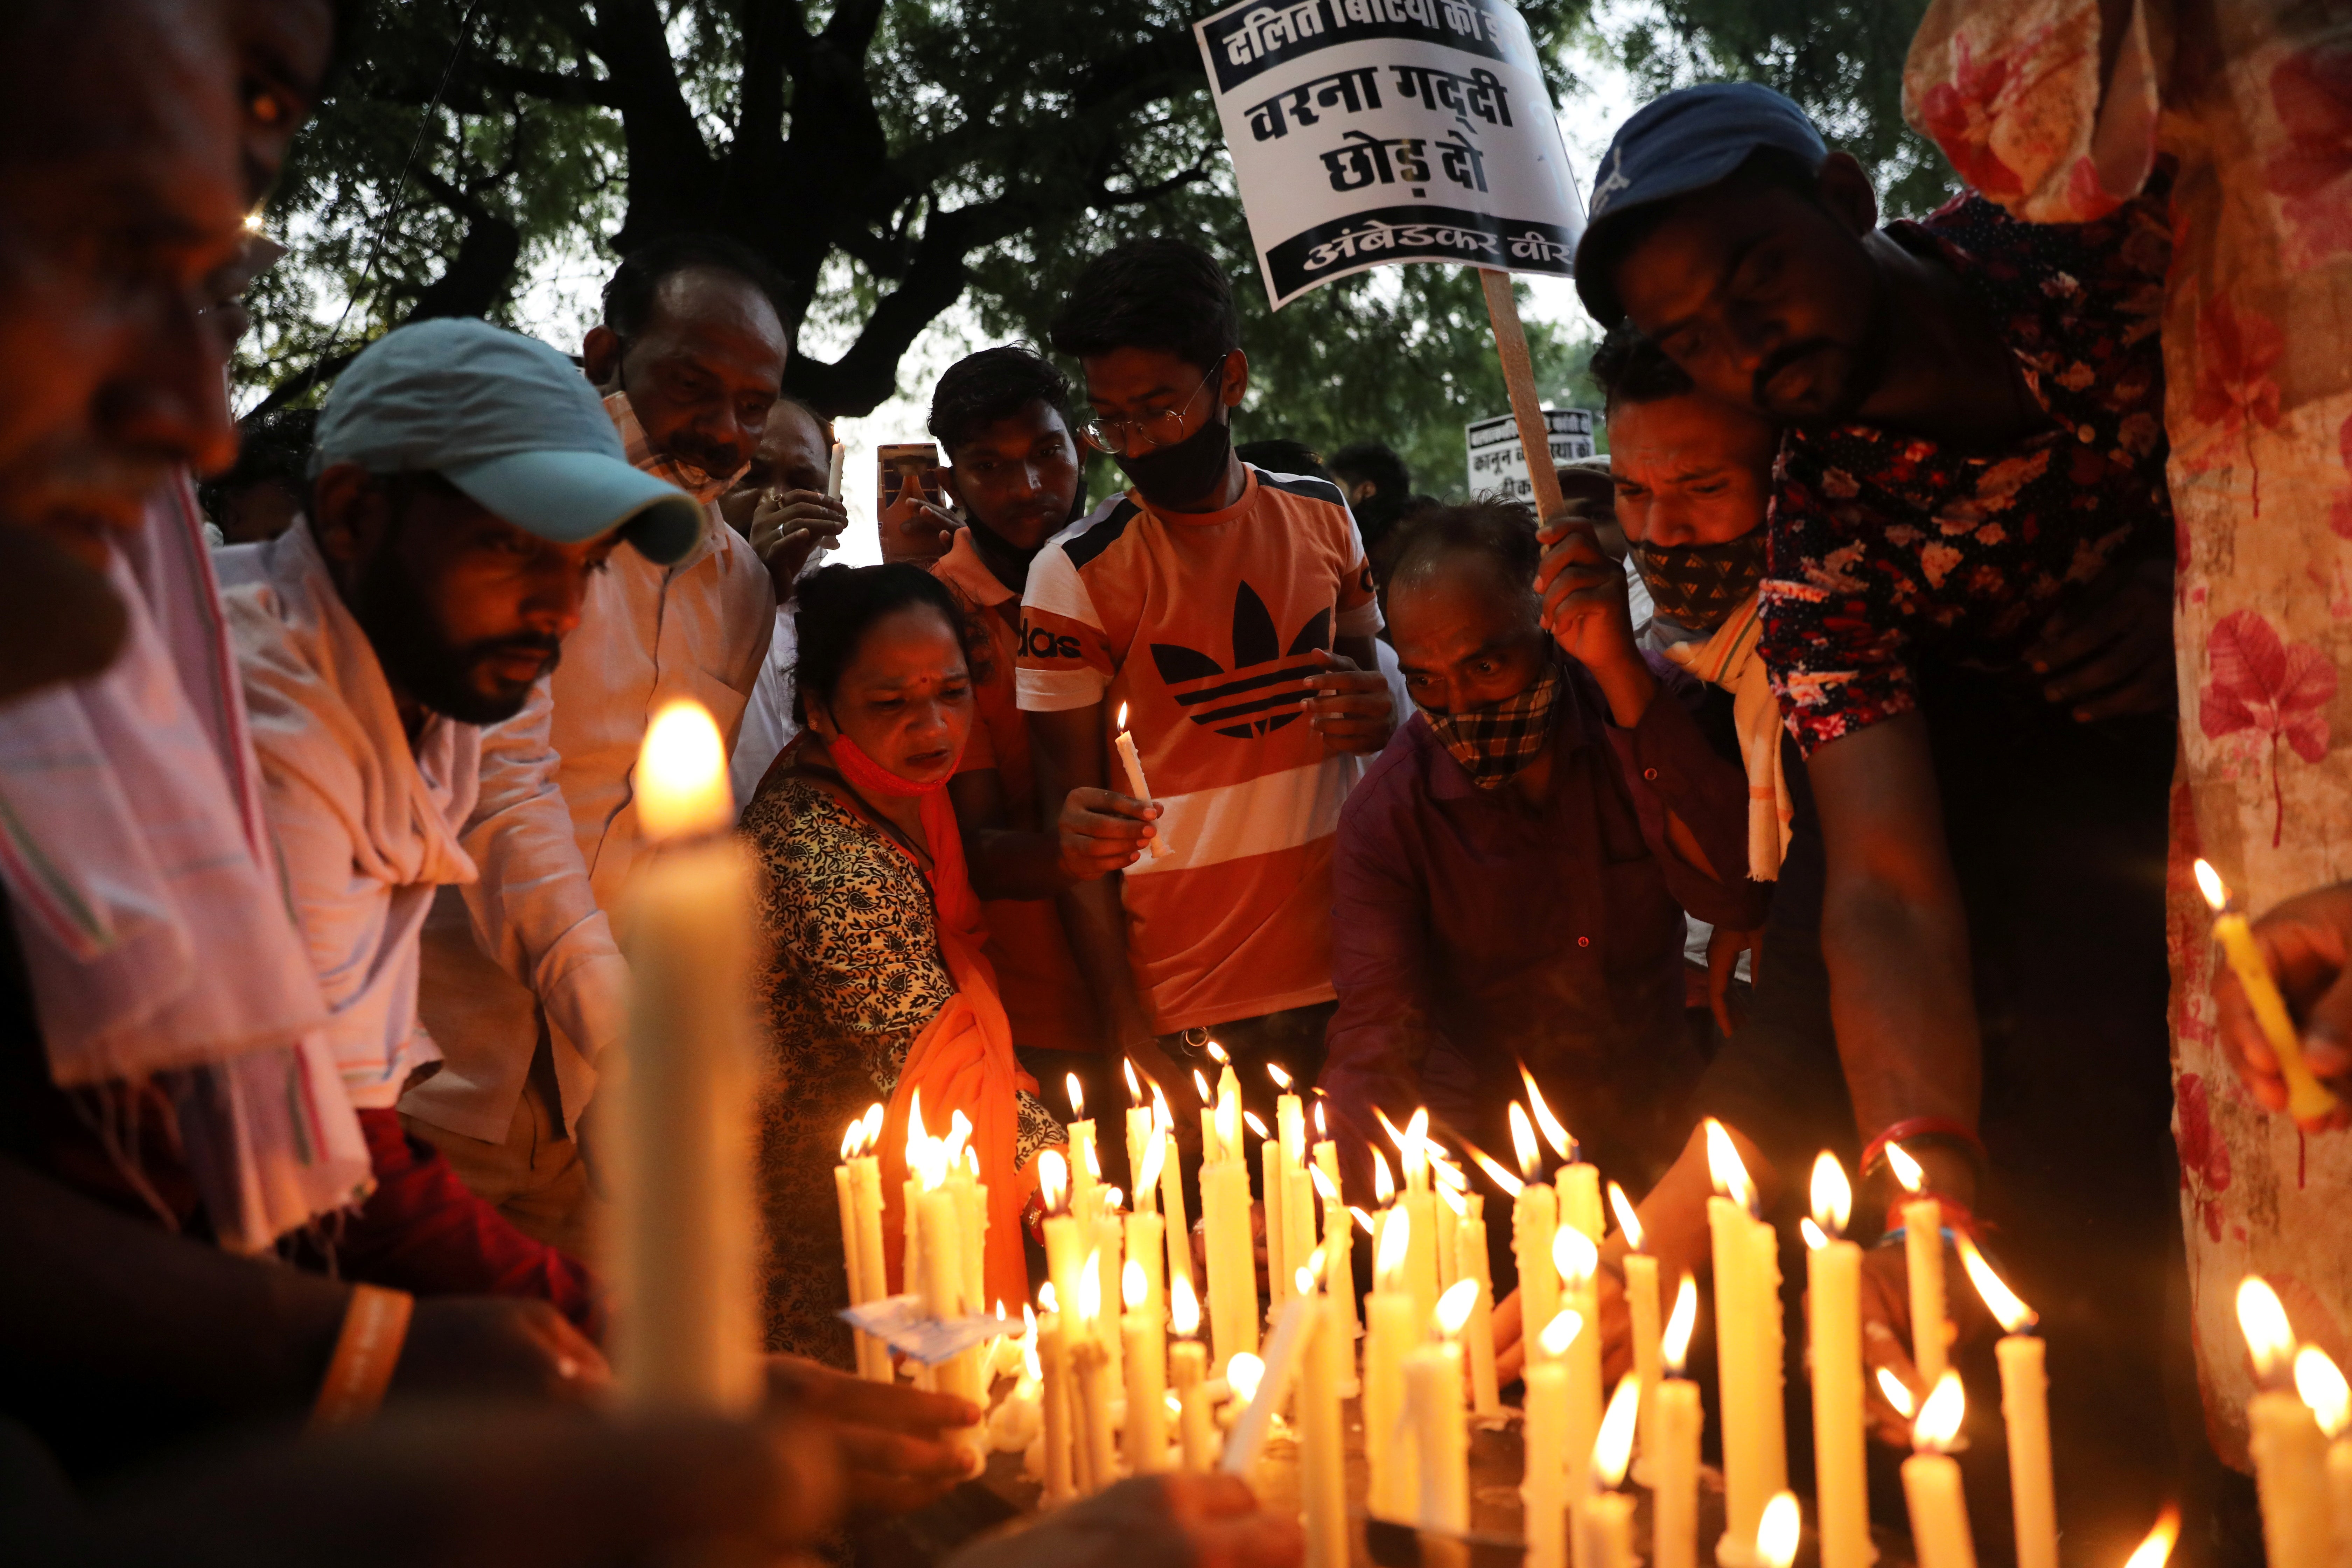 People attend a candlelight vigil to protest against the alleged rape and murder of a 9-year-old girl in New Delhi, India